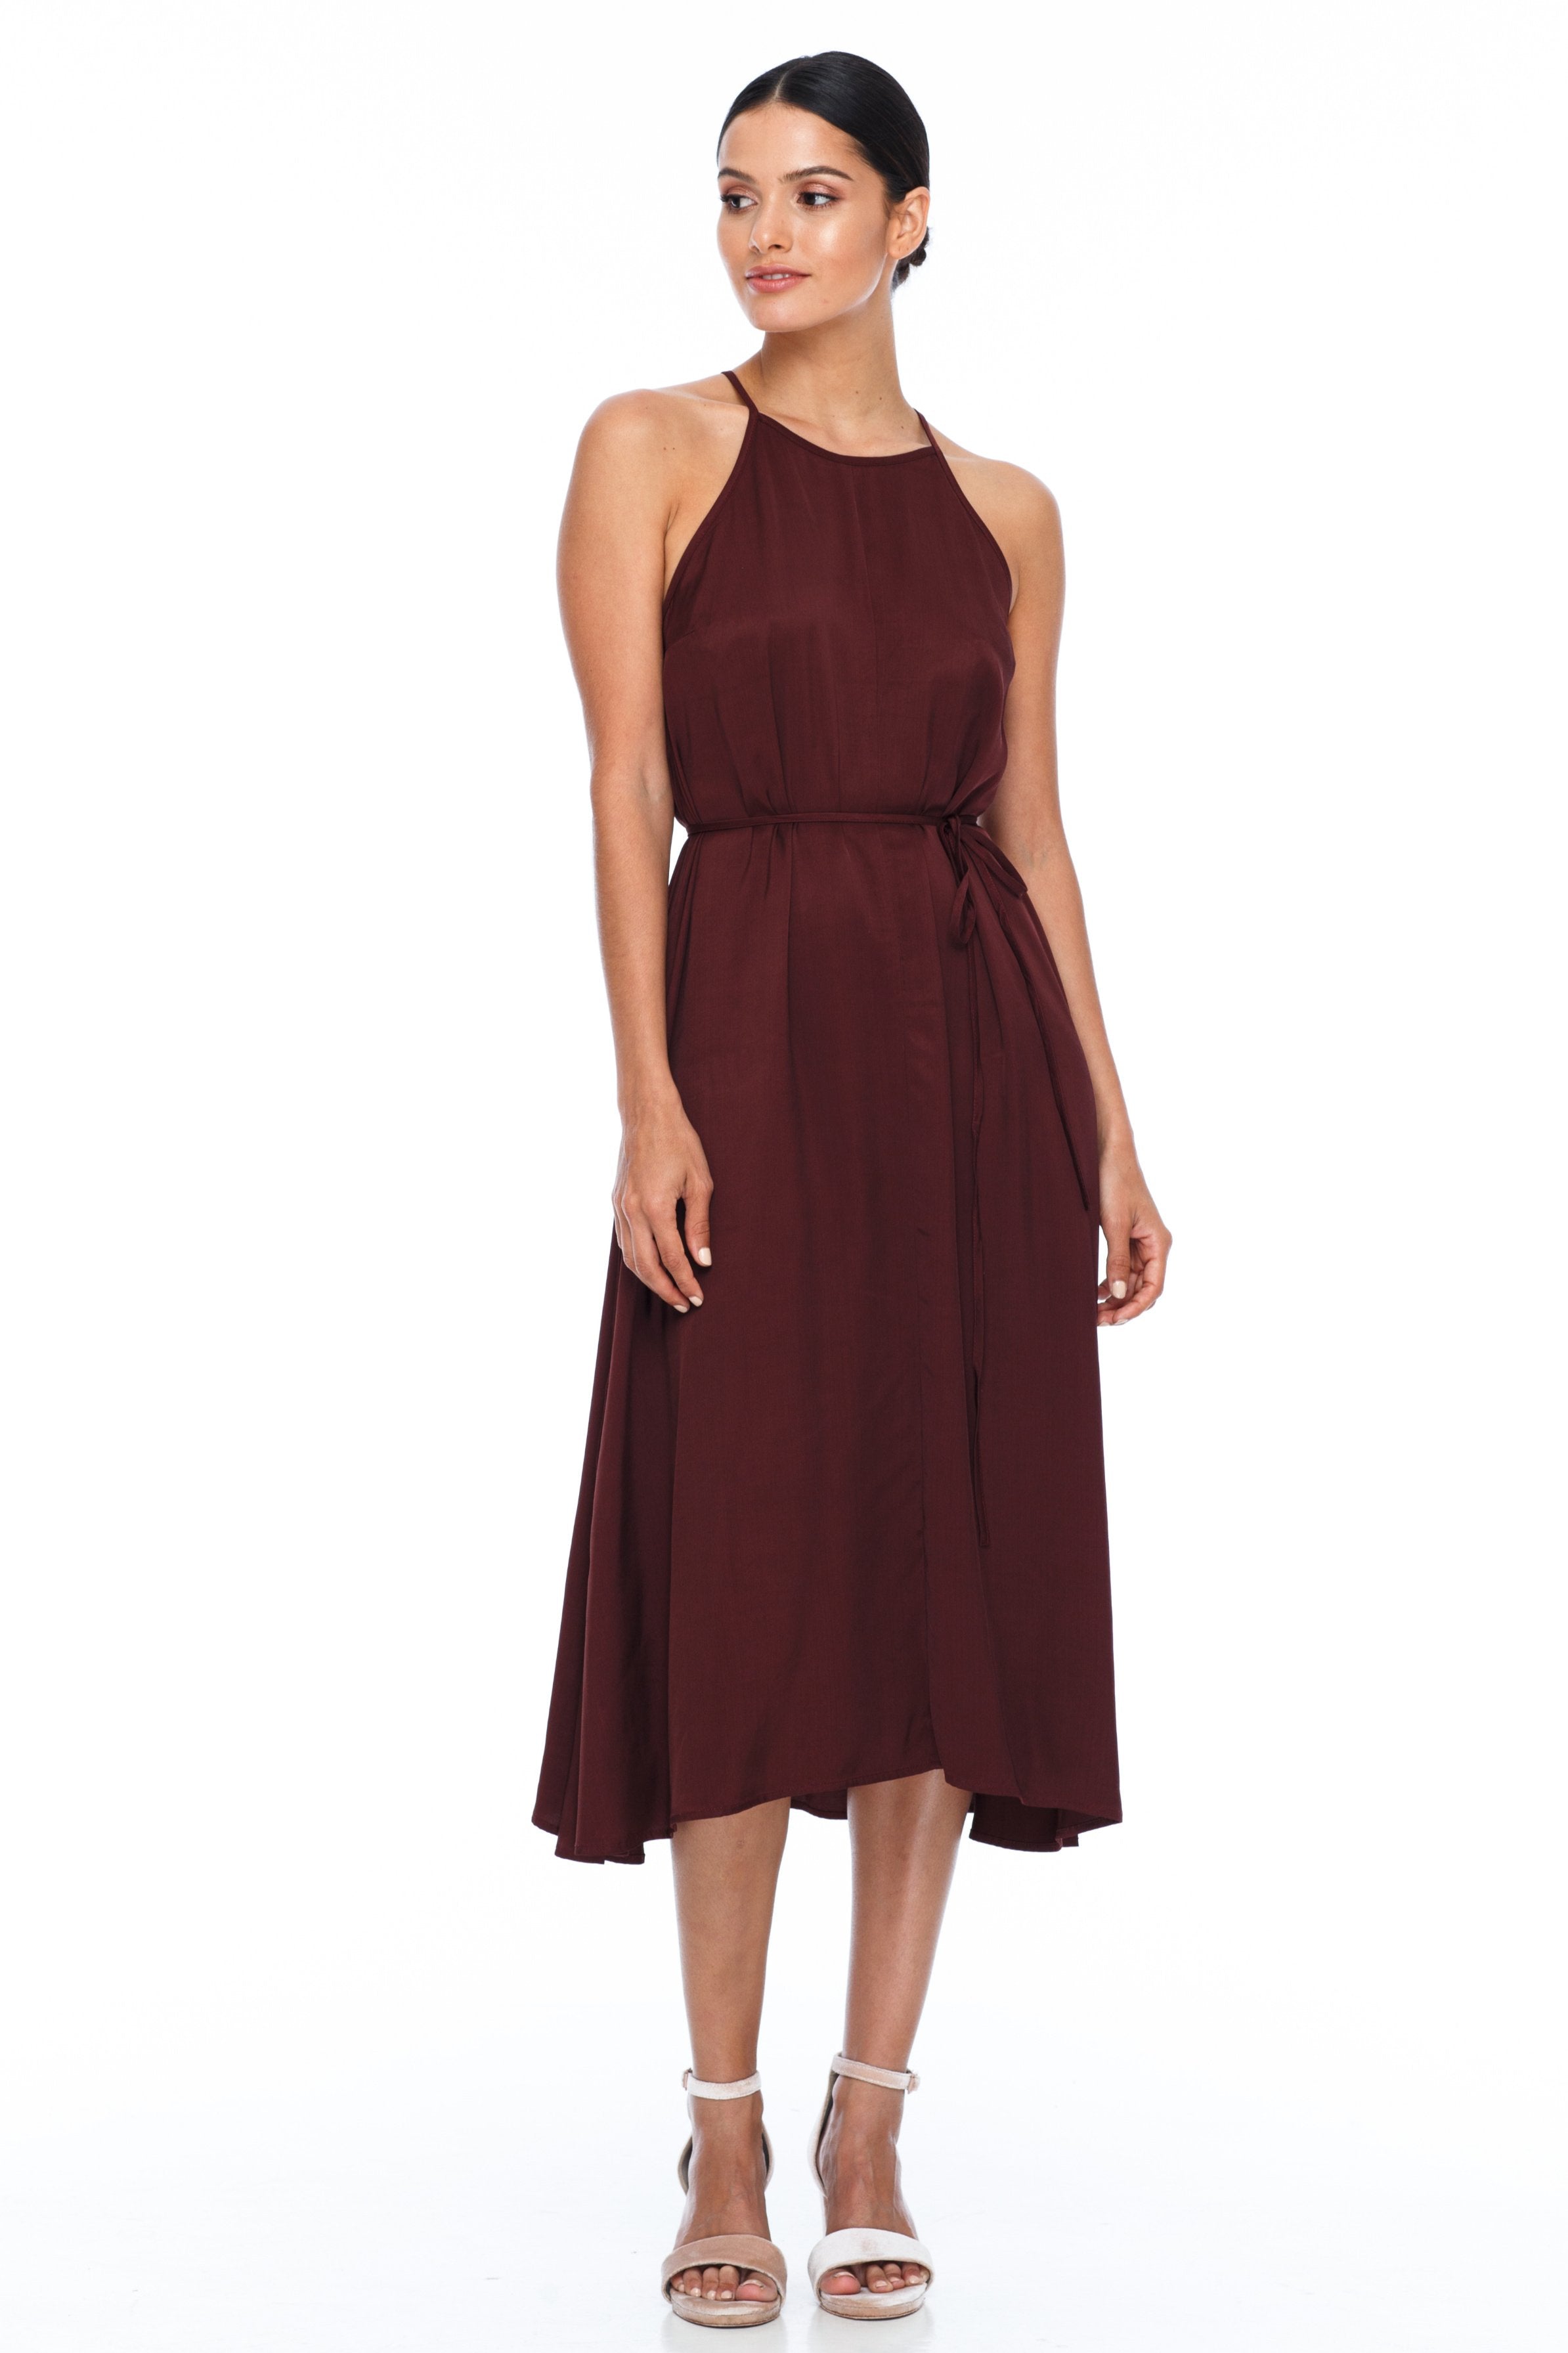 A BLAK Bridesmaids Dress  The Haven Dress is a classic style that’s suits everyone! Simple yet elegant, with a free flowing silhouette featuring a high neckline and keyhole detailing on the back